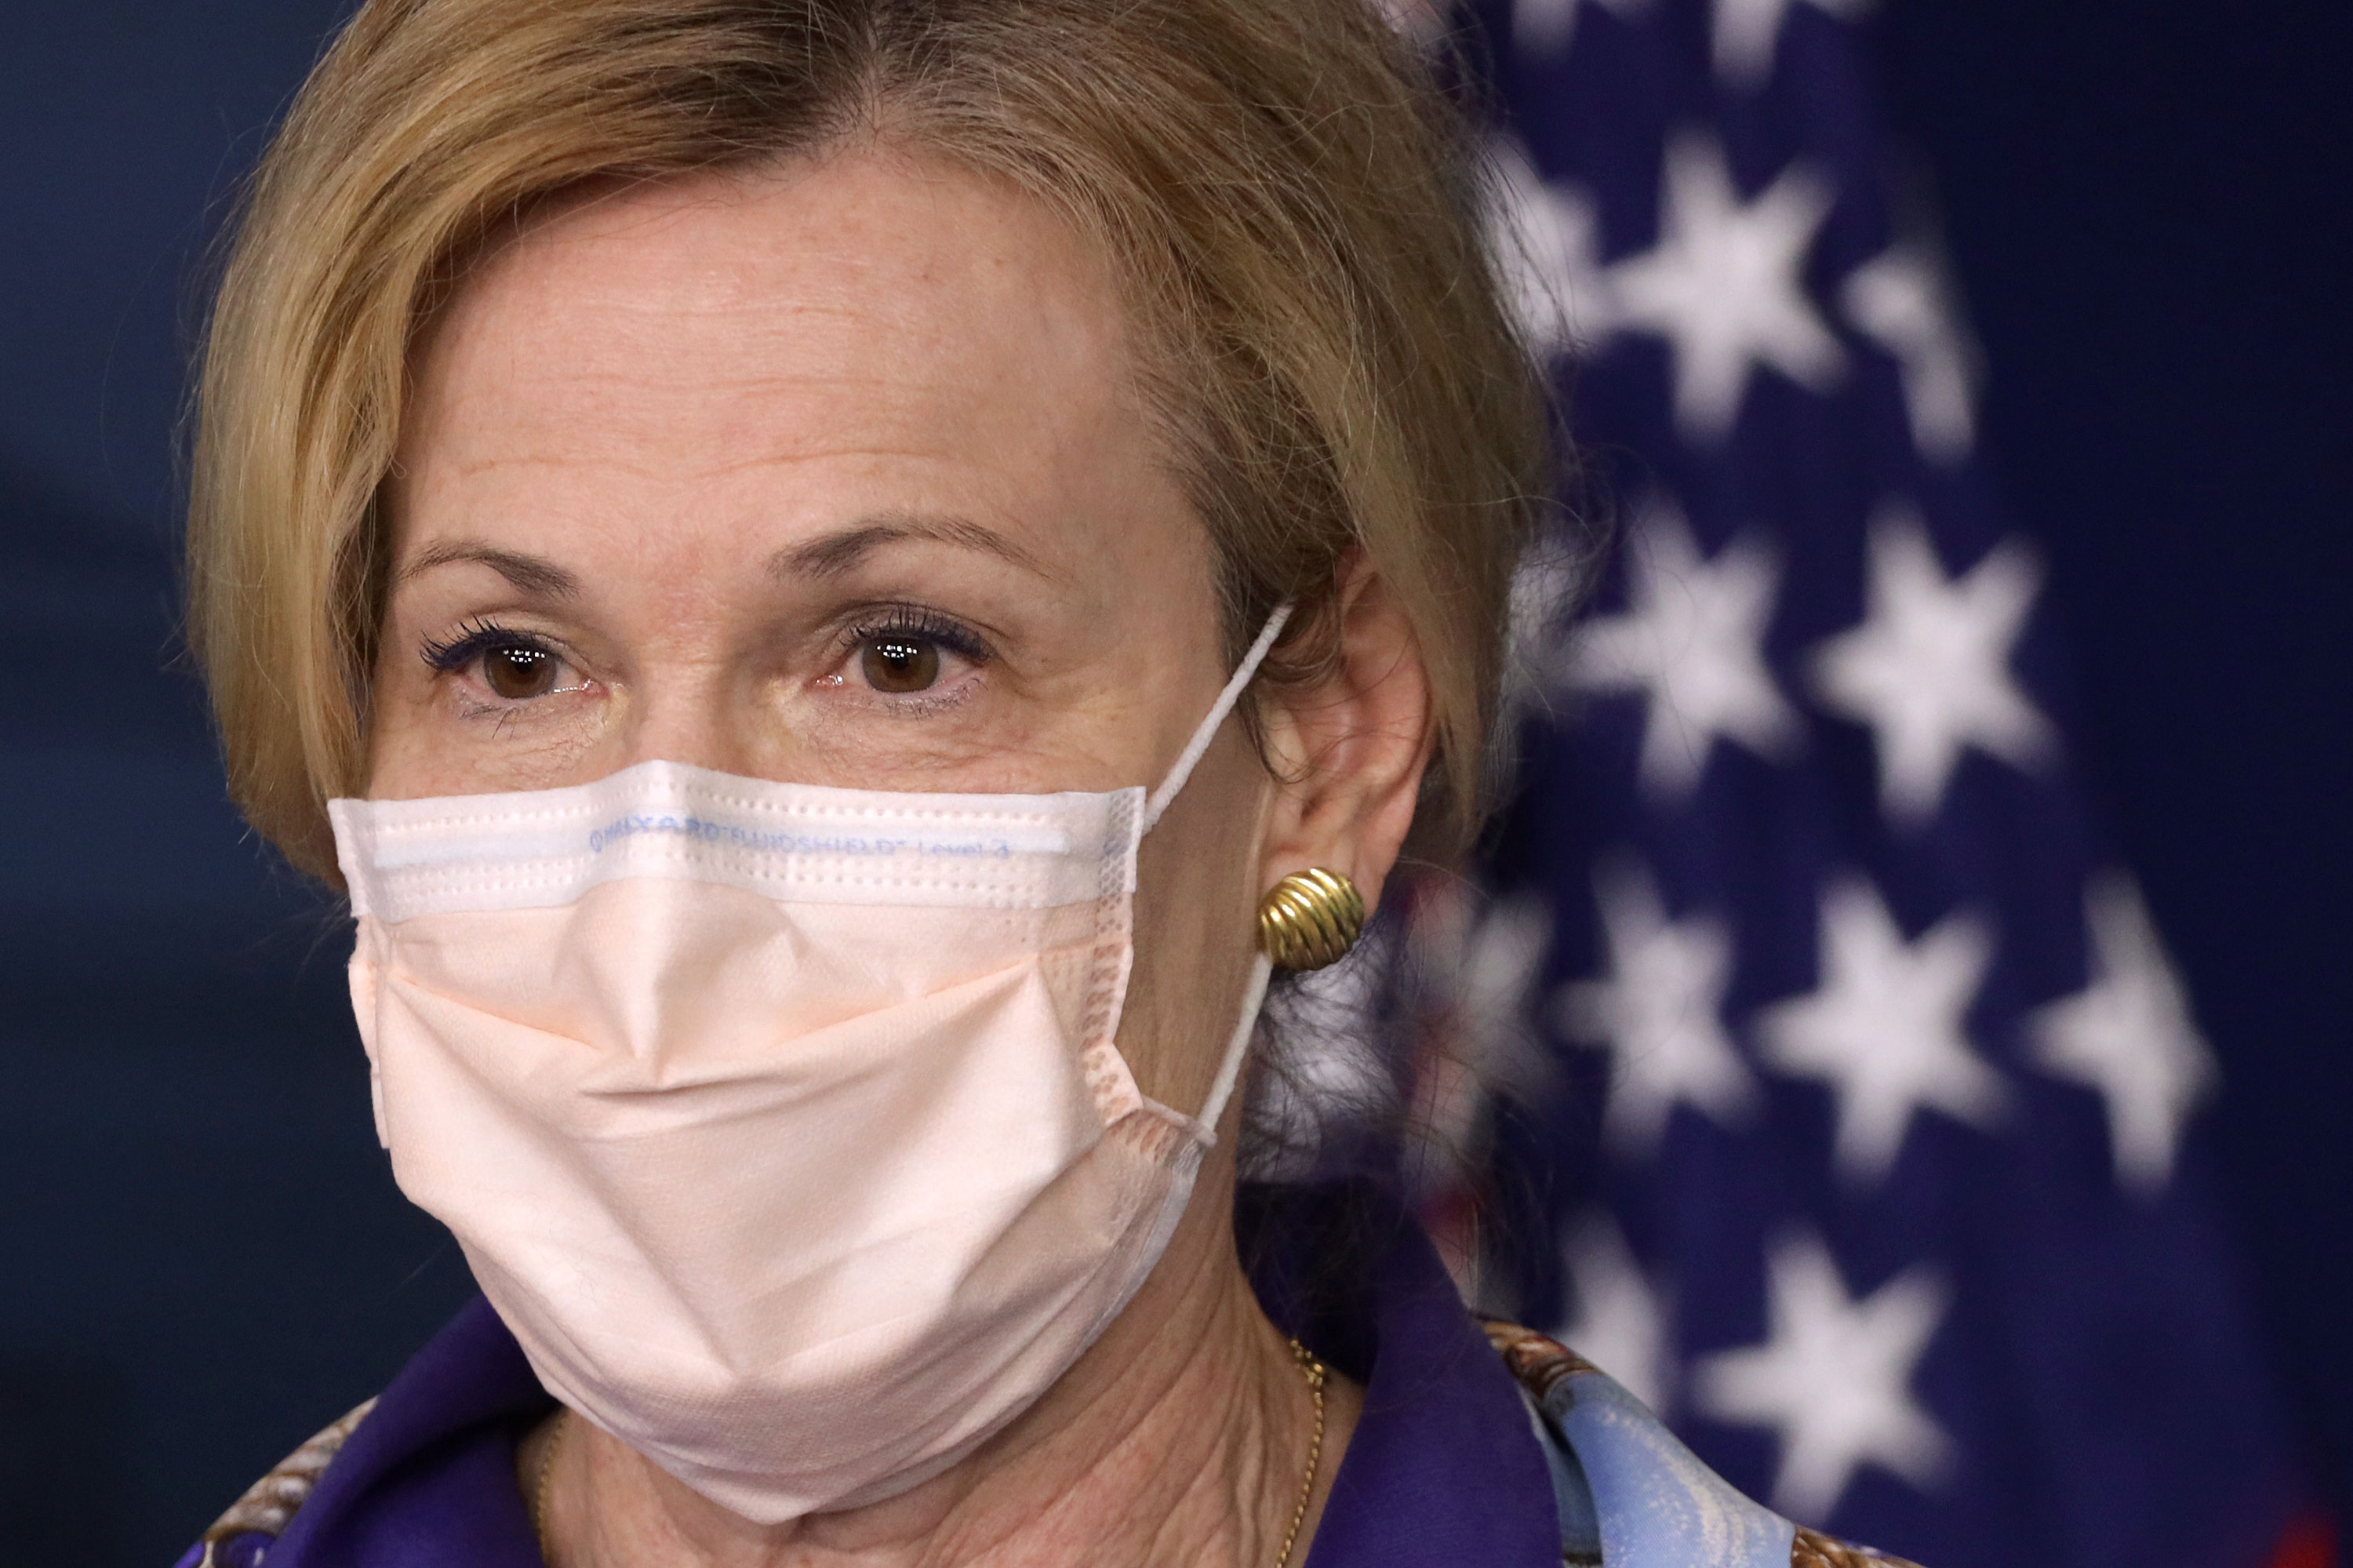 Dr. Deborah Birx speaks with a facemask on during a briefing at the White House on May 22.